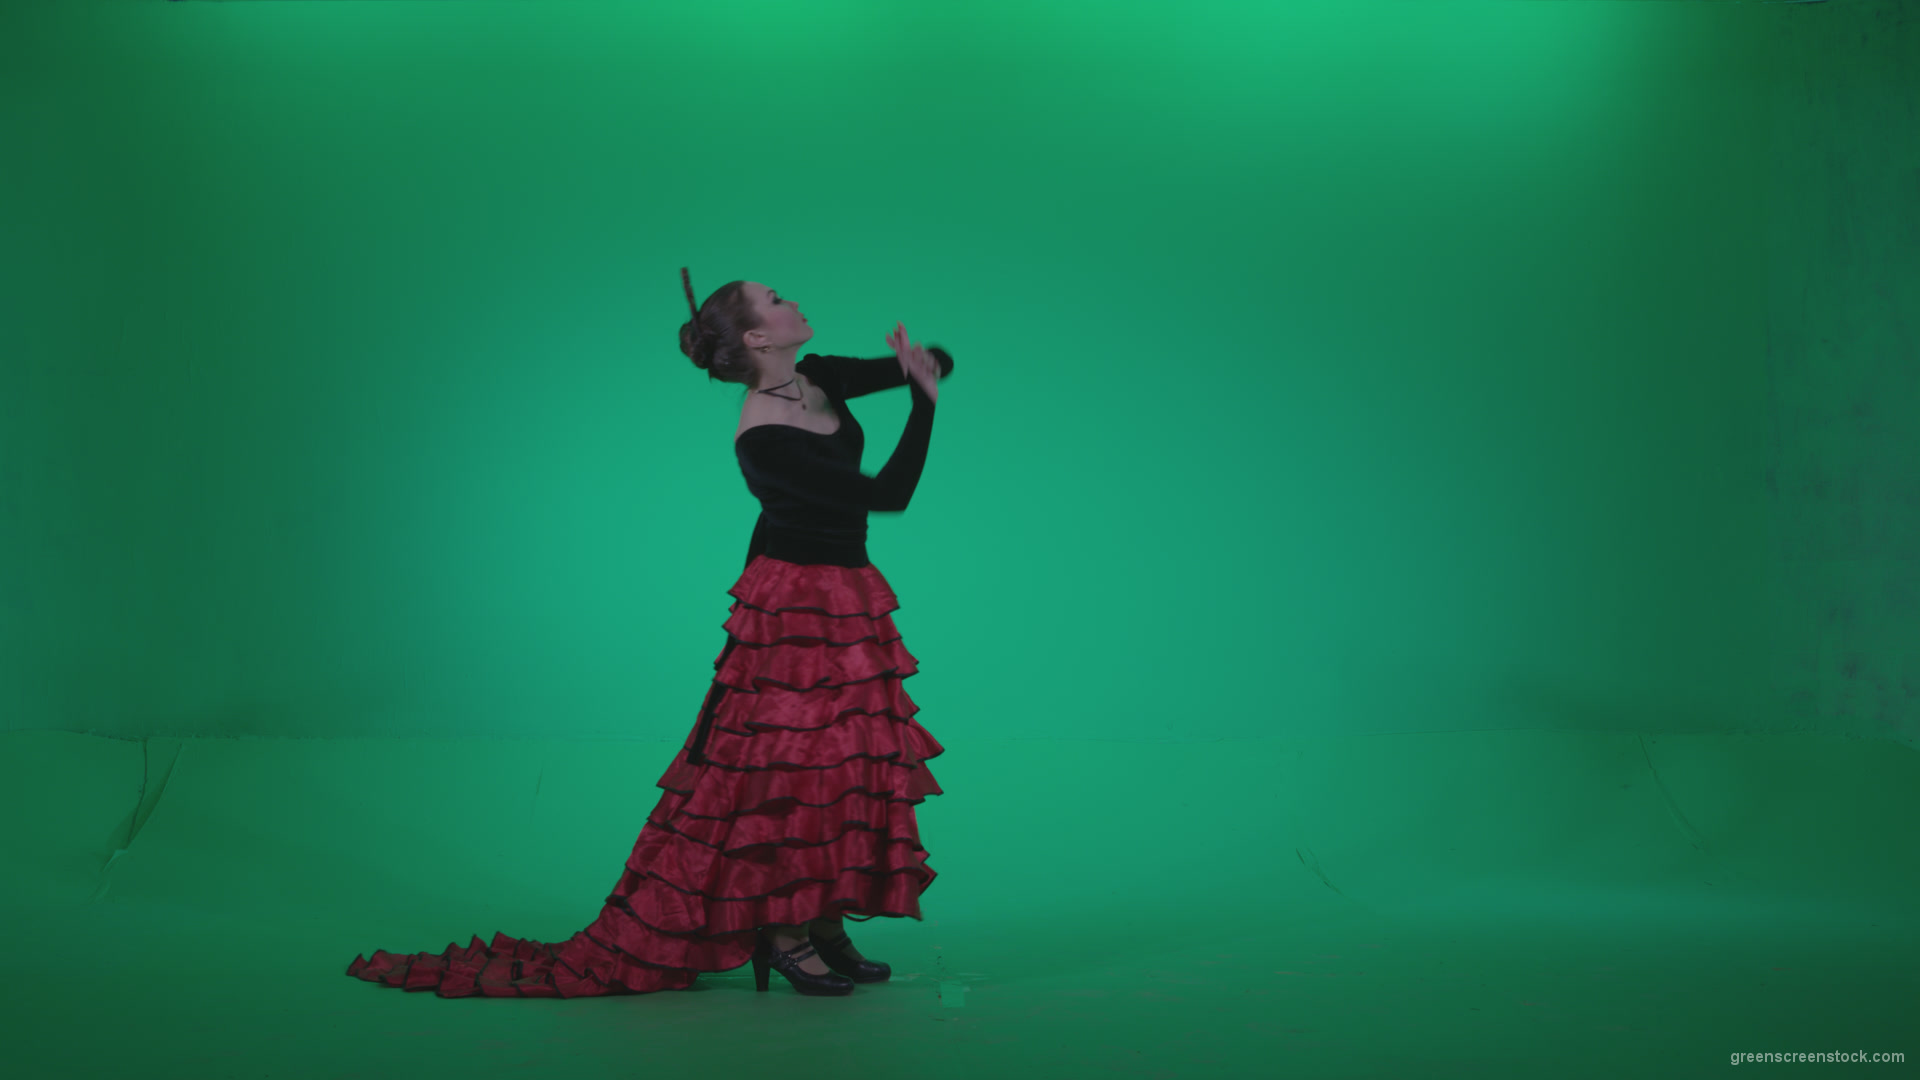 Flamenco-Red-and-Black-Dress-rb11-Green-Screen-Video-Footage_006 Green Screen Stock